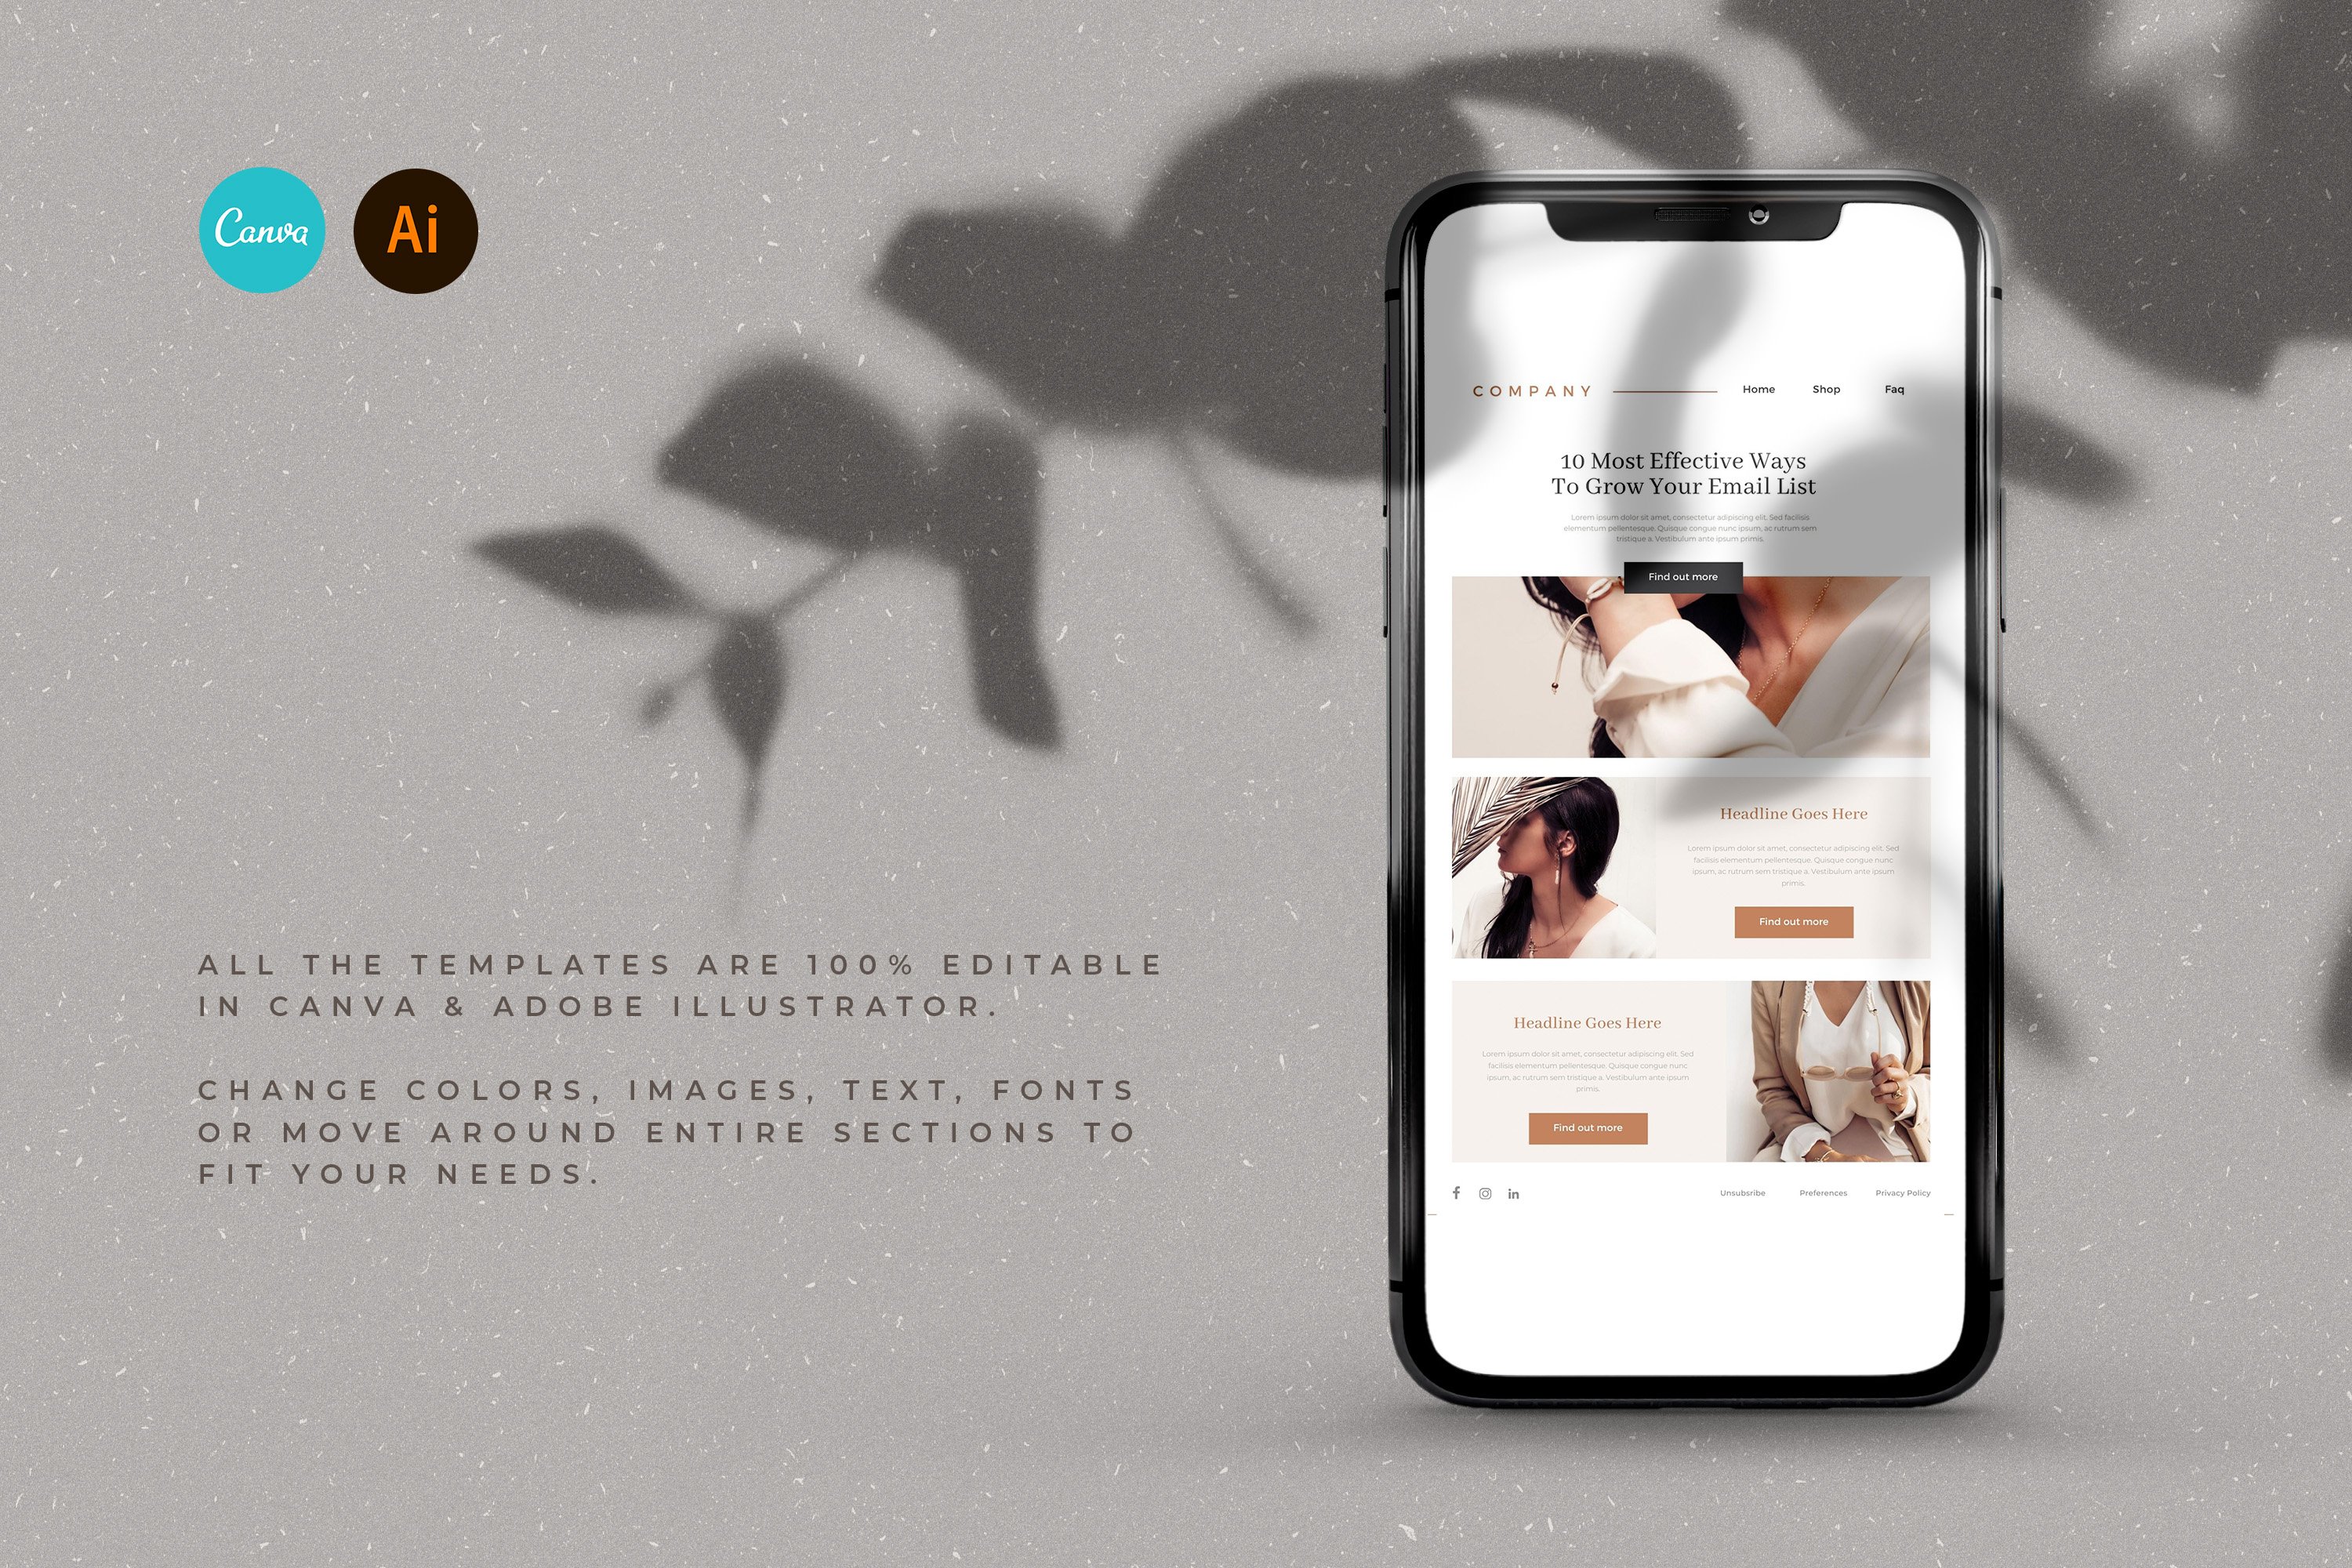 This template is a mobile friendly with an adaptive design.